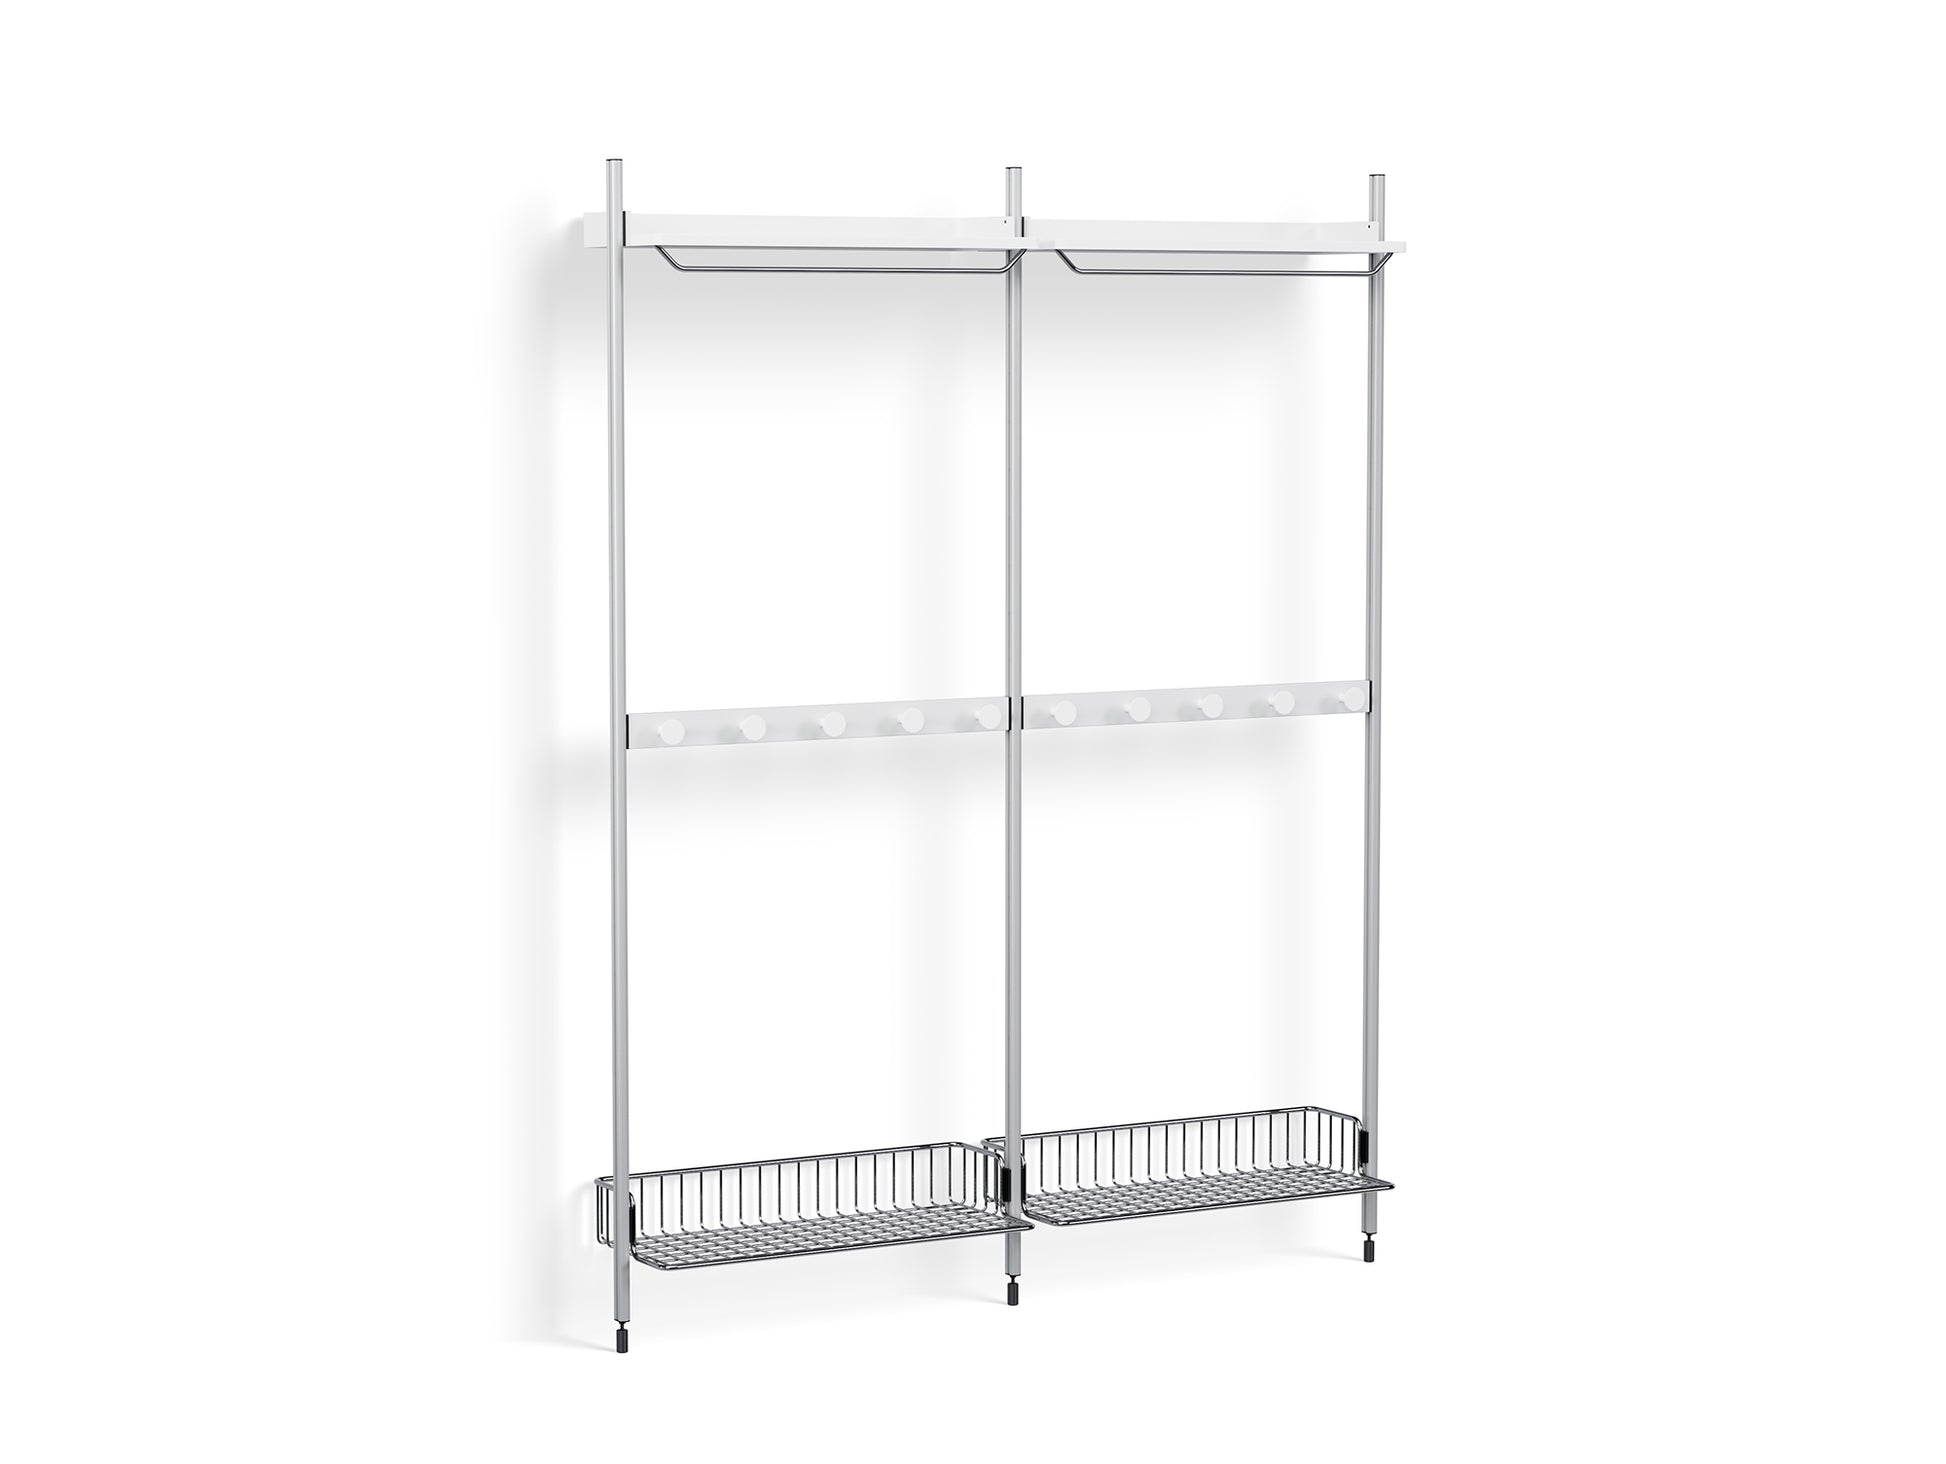 Pier System 1042 by HAY - Clear Anodised Aluminium Uprights / PS white with Chromed Wire Shelf